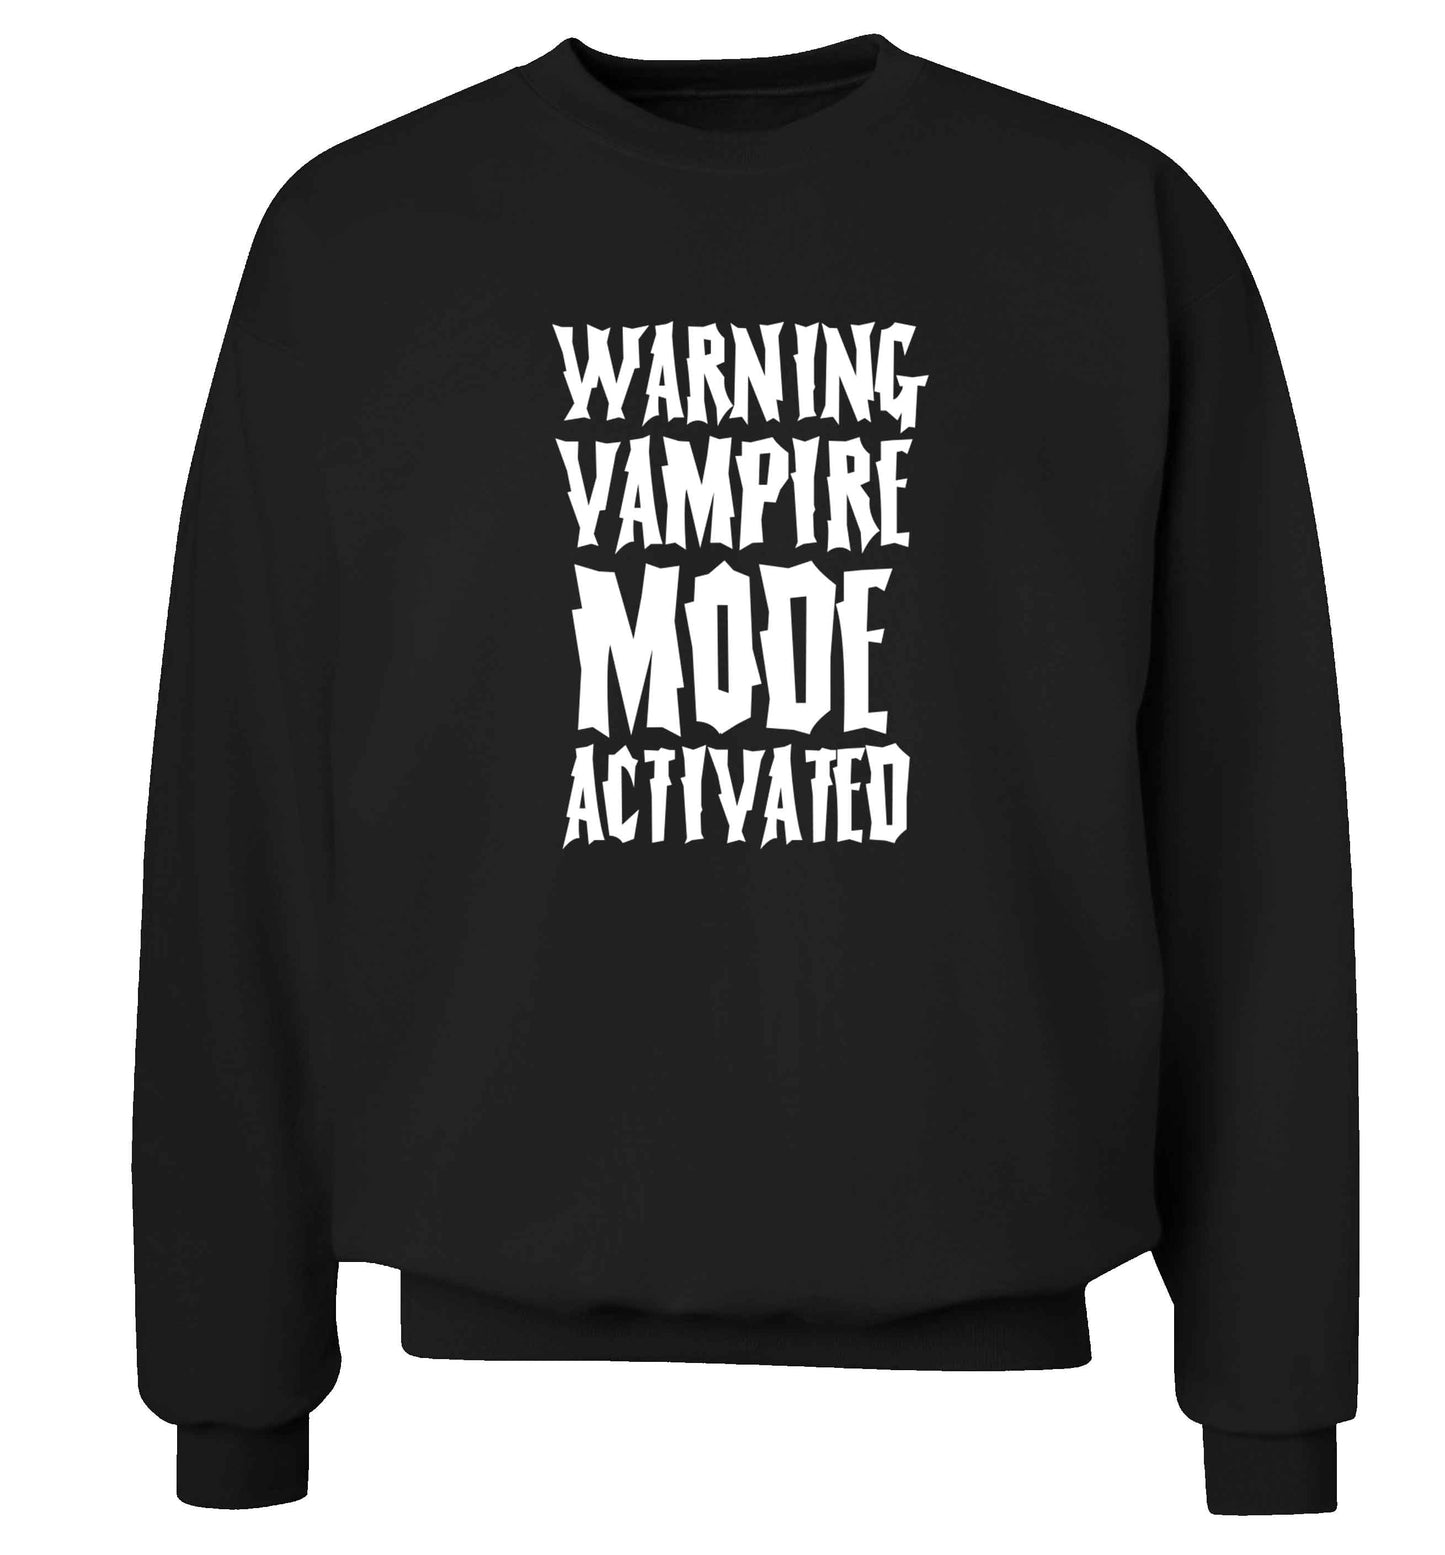 Warning vampire mode activated adult's unisex black sweater 2XL